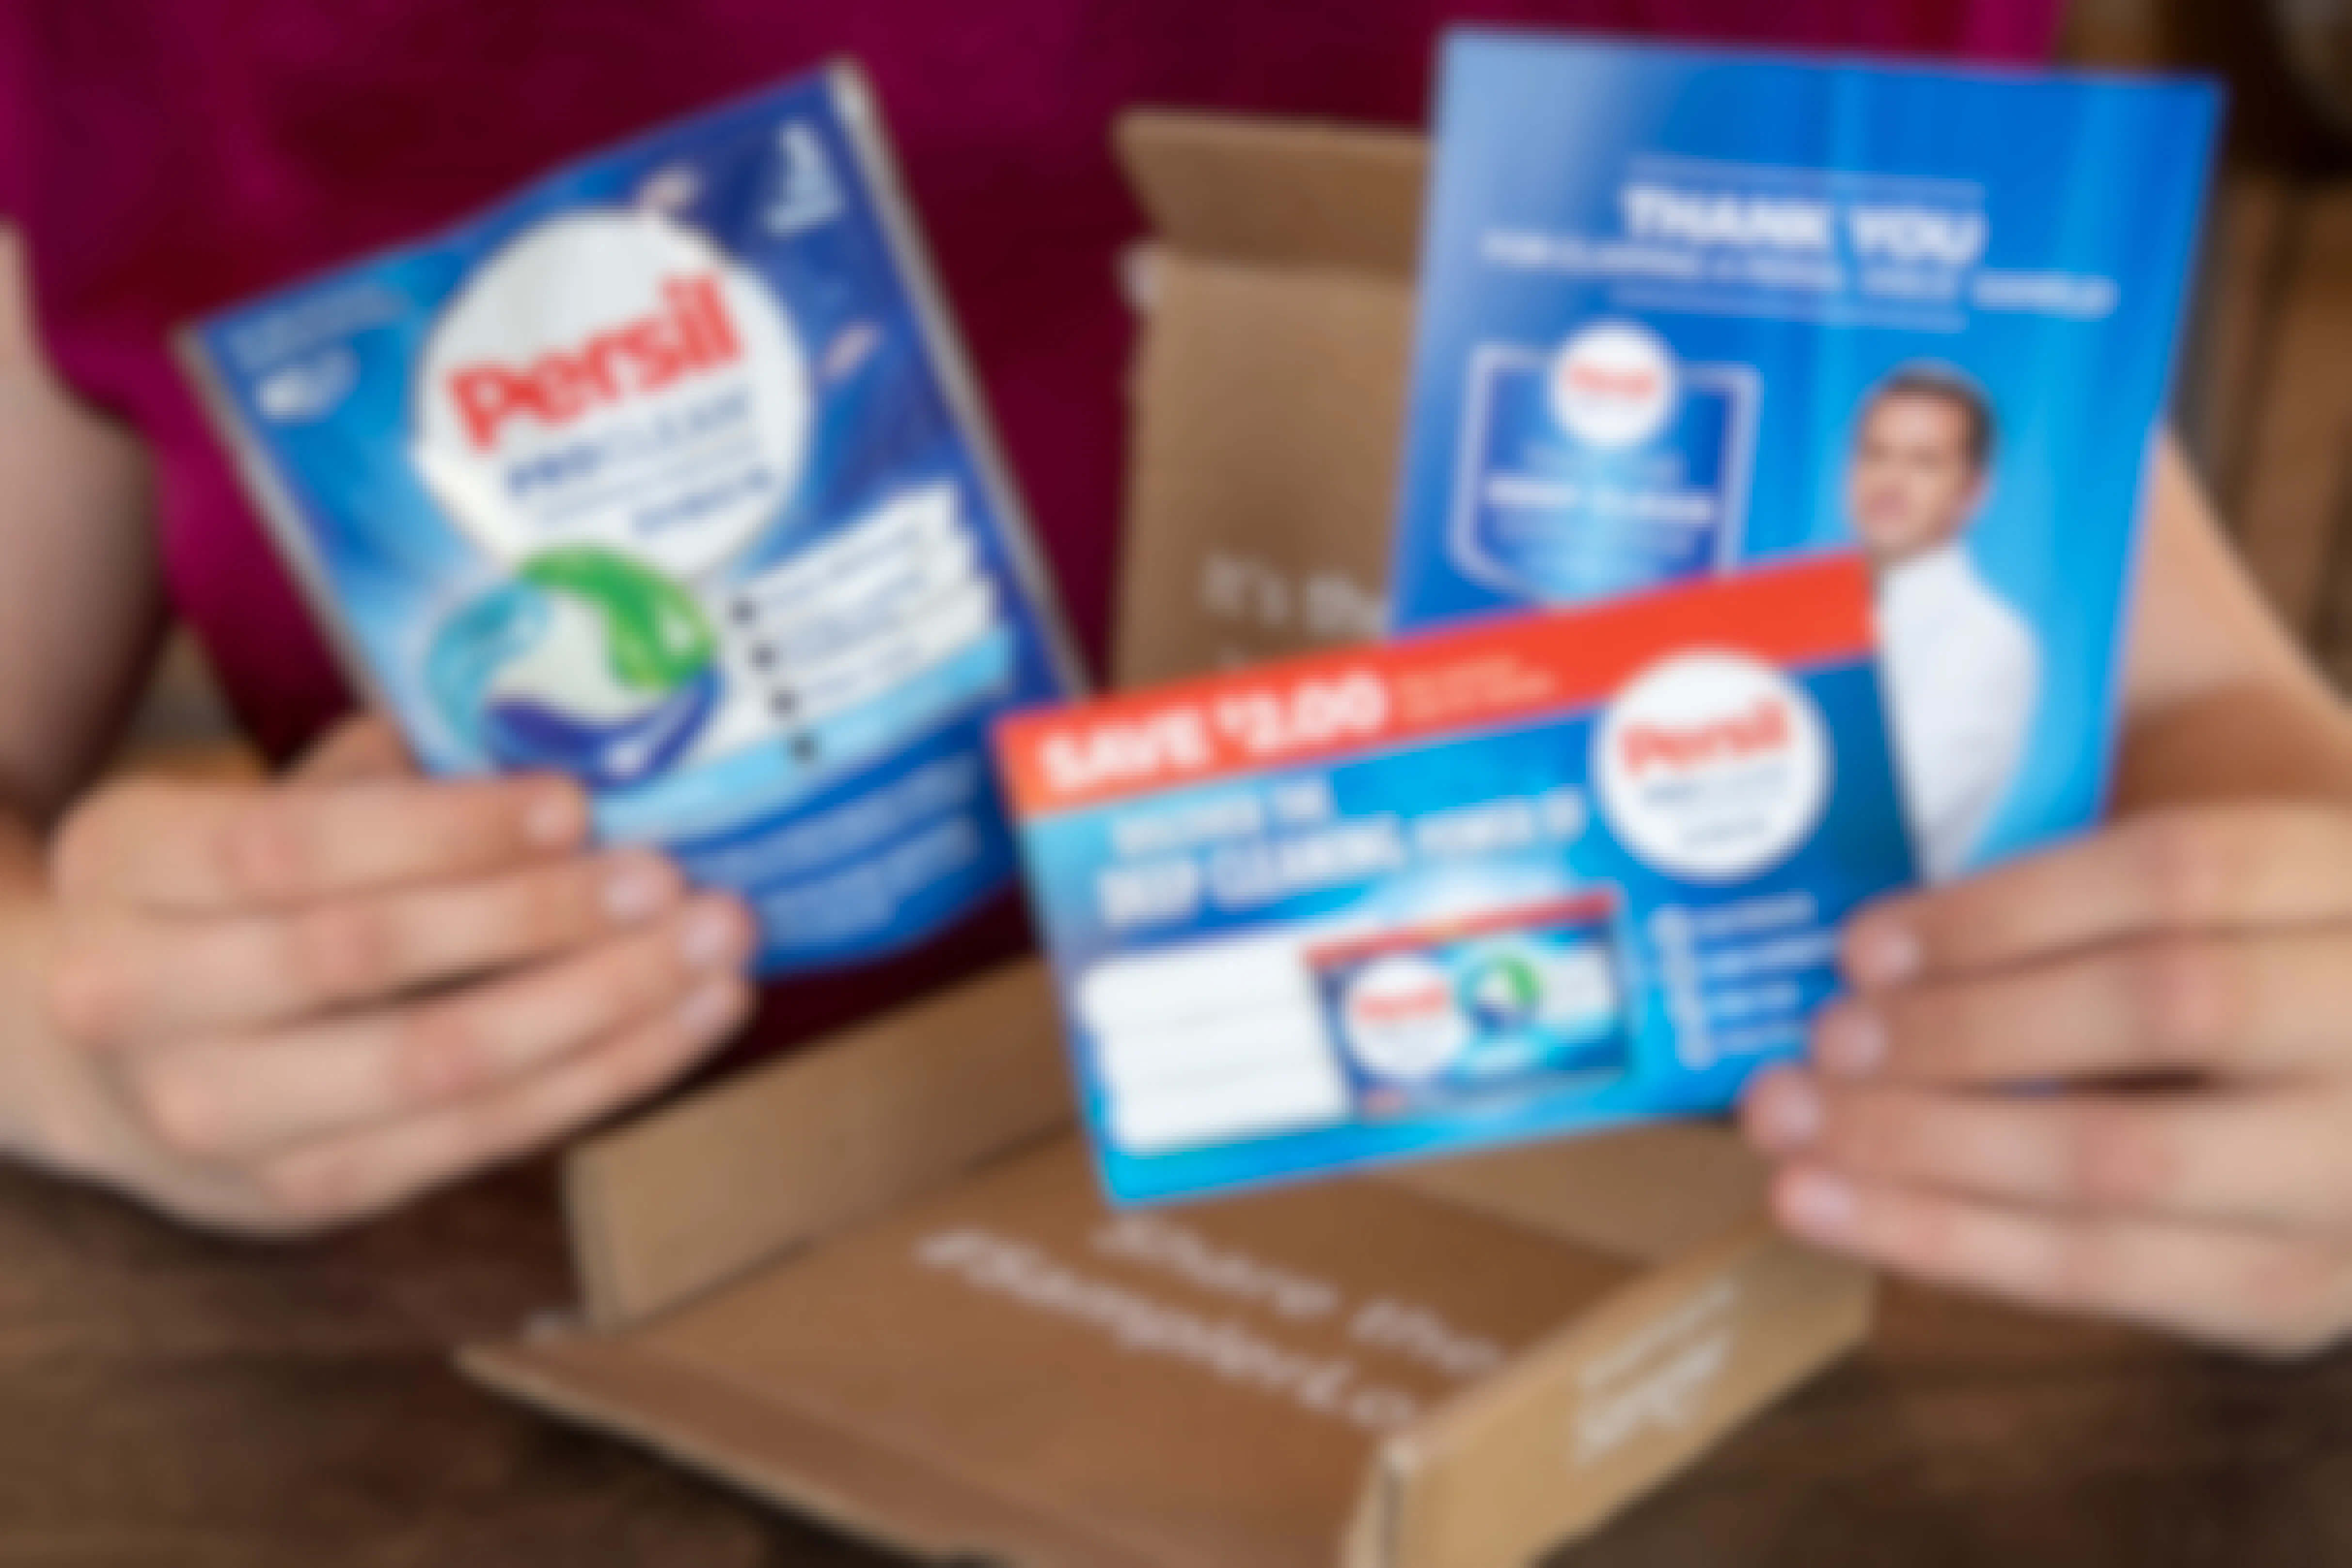 A woman holding a Persil sample with a coupon and info advertisement next to the Sampler box they came in.